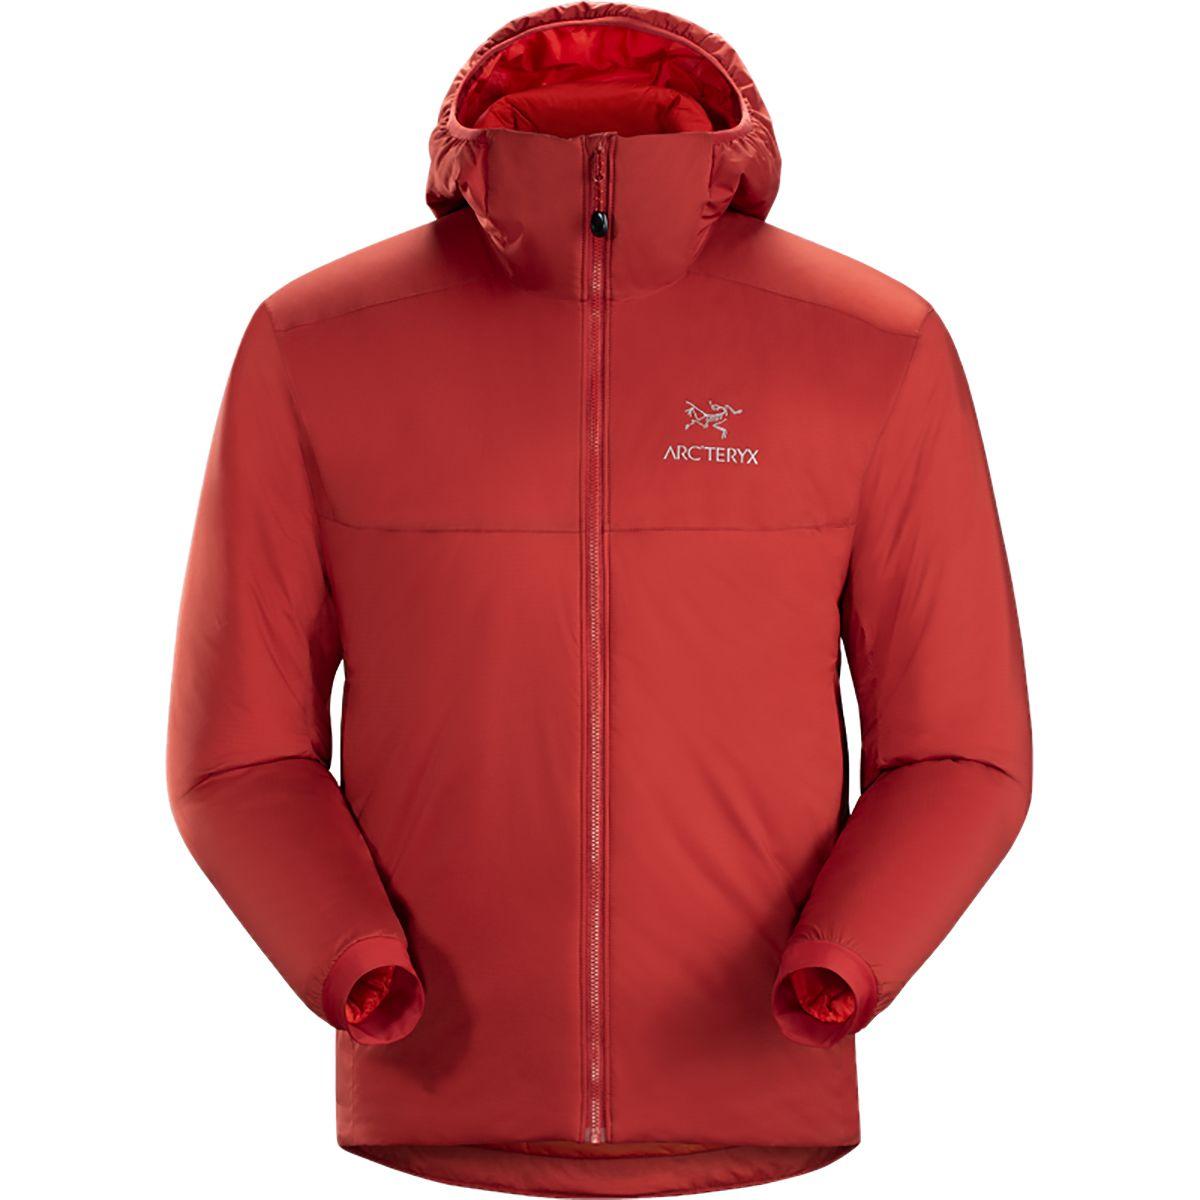 Arc'teryx Synthetic Atom Ar Hooded Insulated Jacket in Red for Men - Lyst